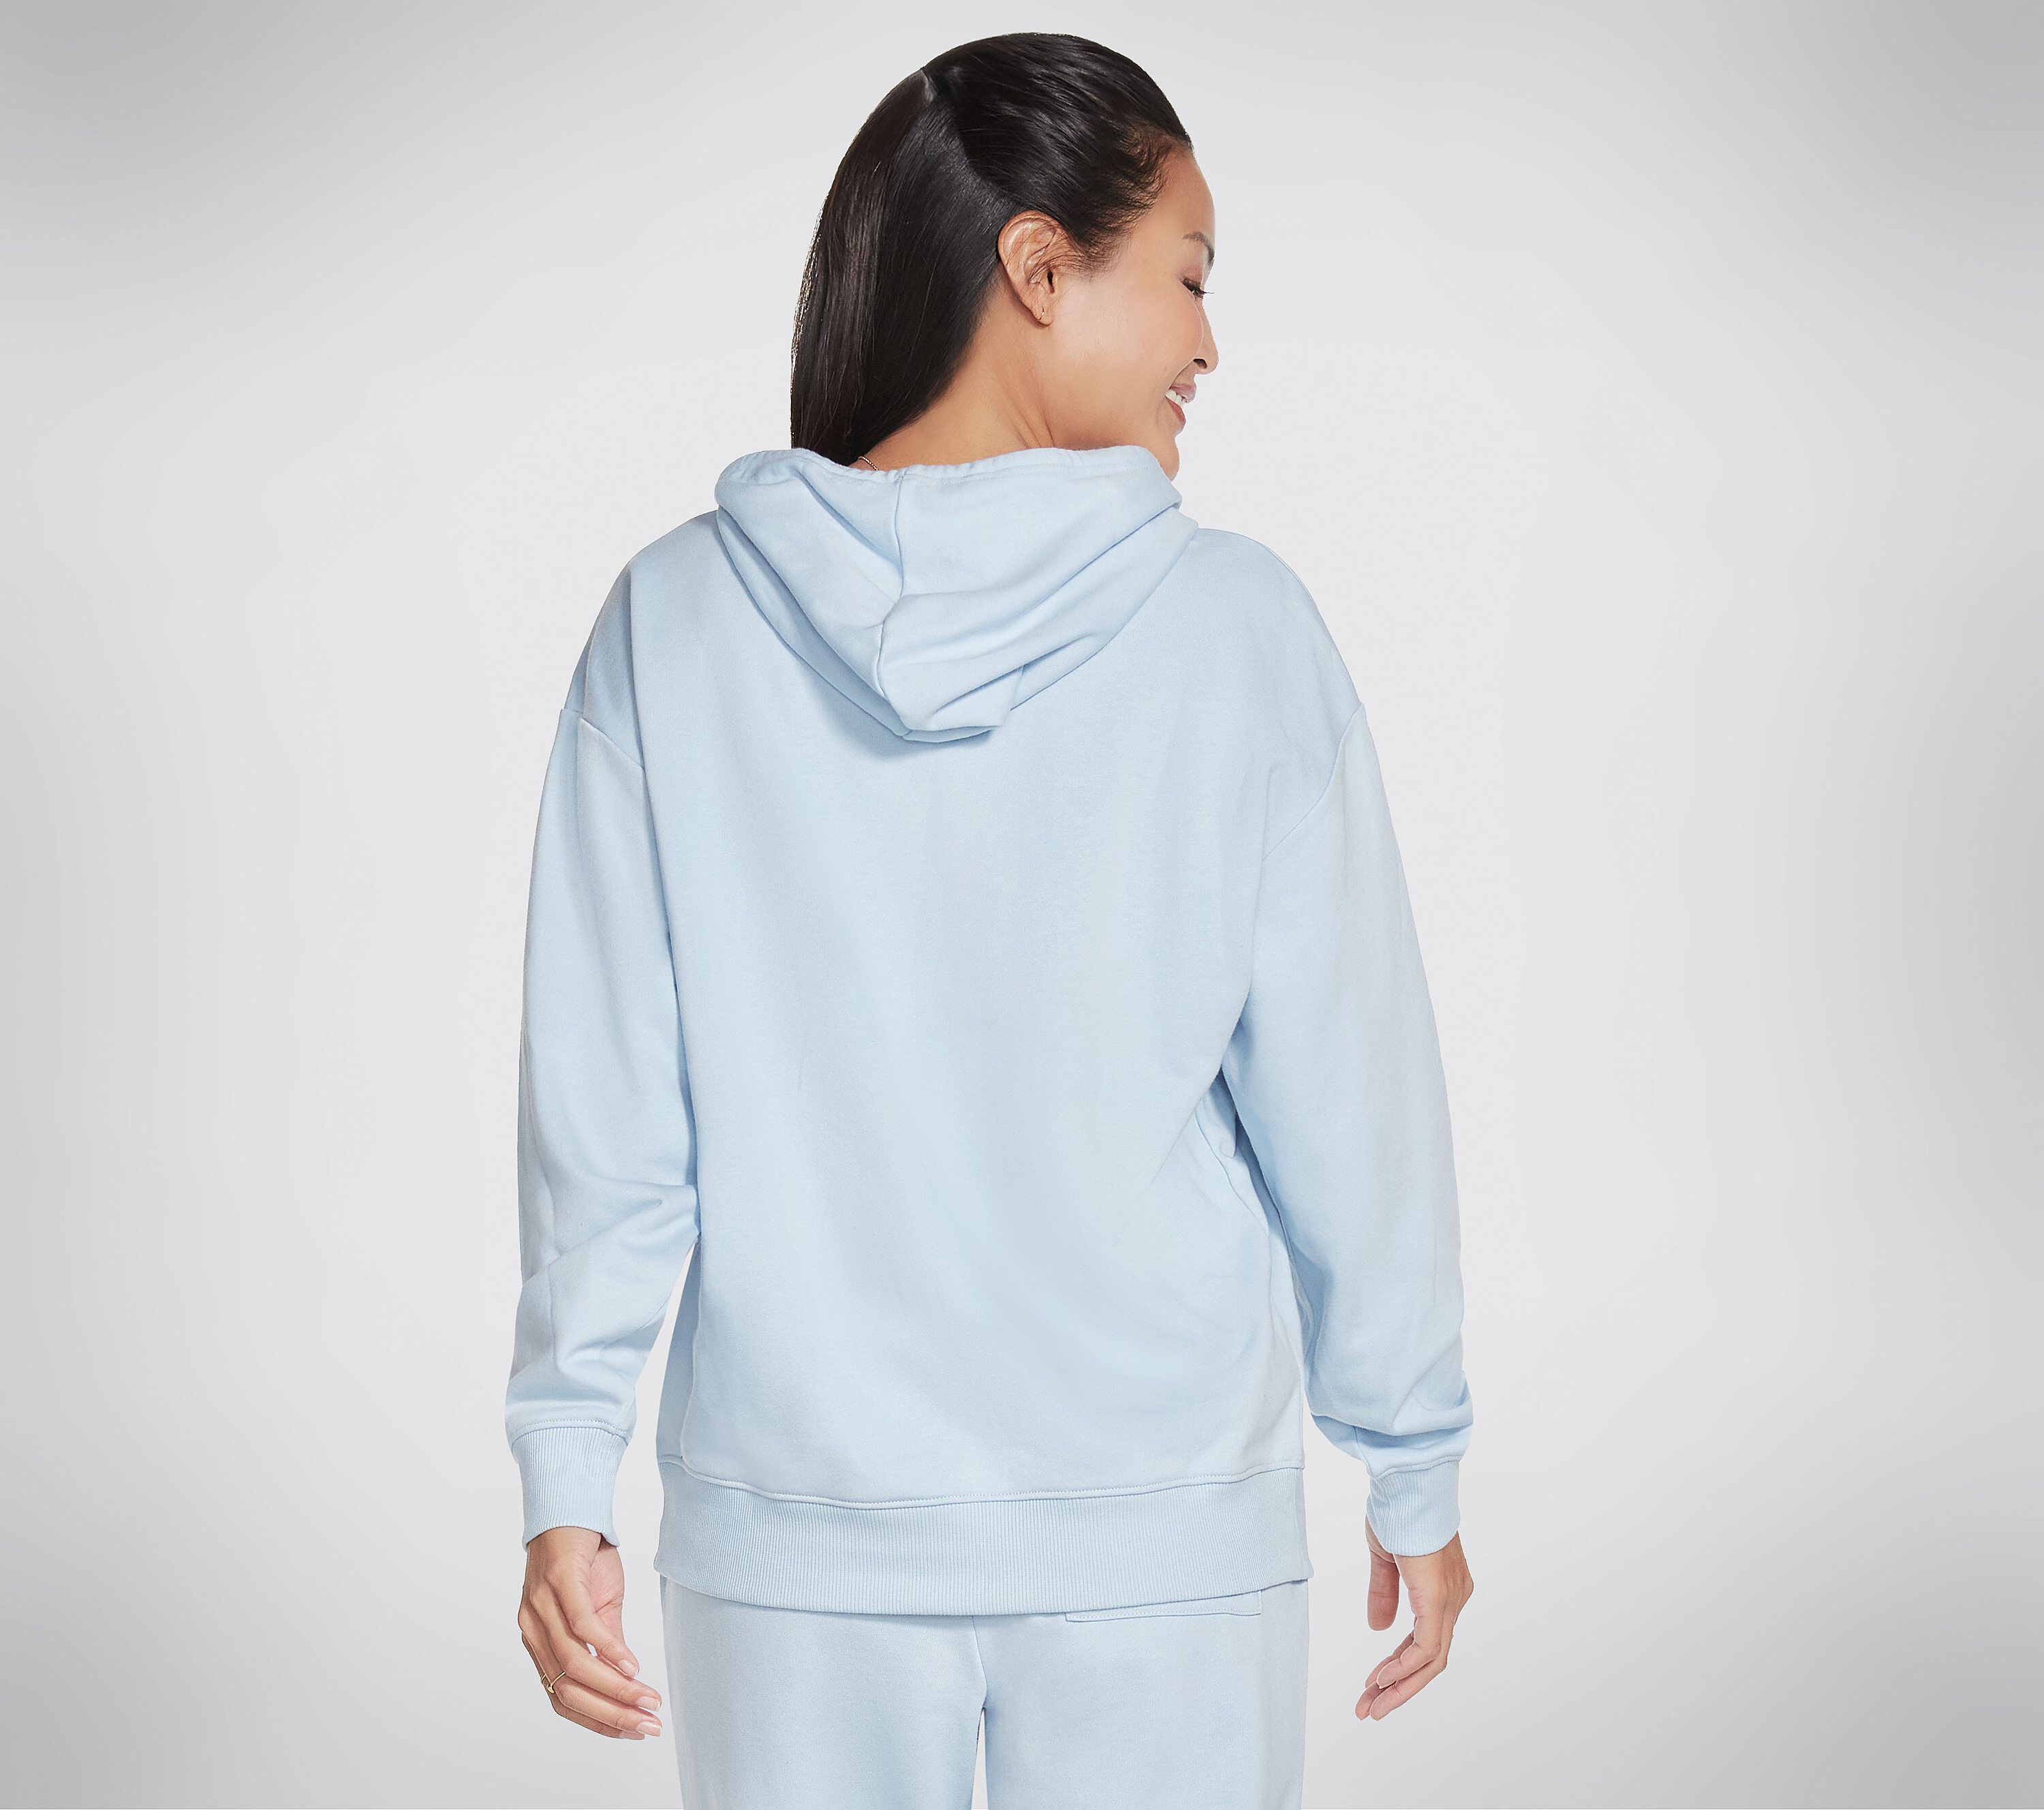 Shop the BOBS Apparel Hipcat Pouch Pullover Hoodie | SKECHERS